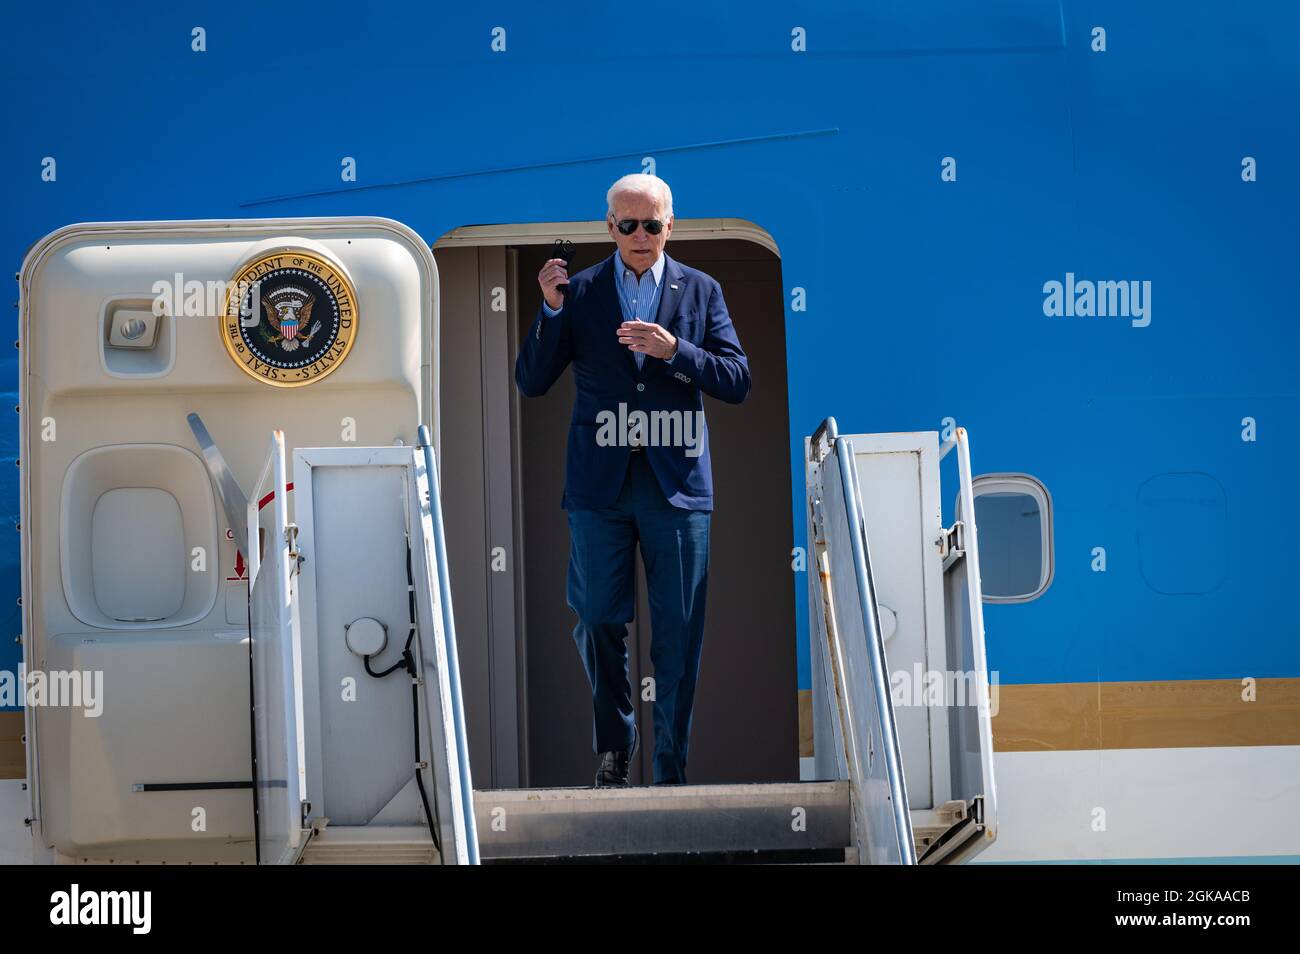 MATHER, CA, US.A. - SEPT. 13, 2021: President Joe Biden exits Air Force 1 and removes his mask before descending to get updated on the State's wildfir Stock Photo